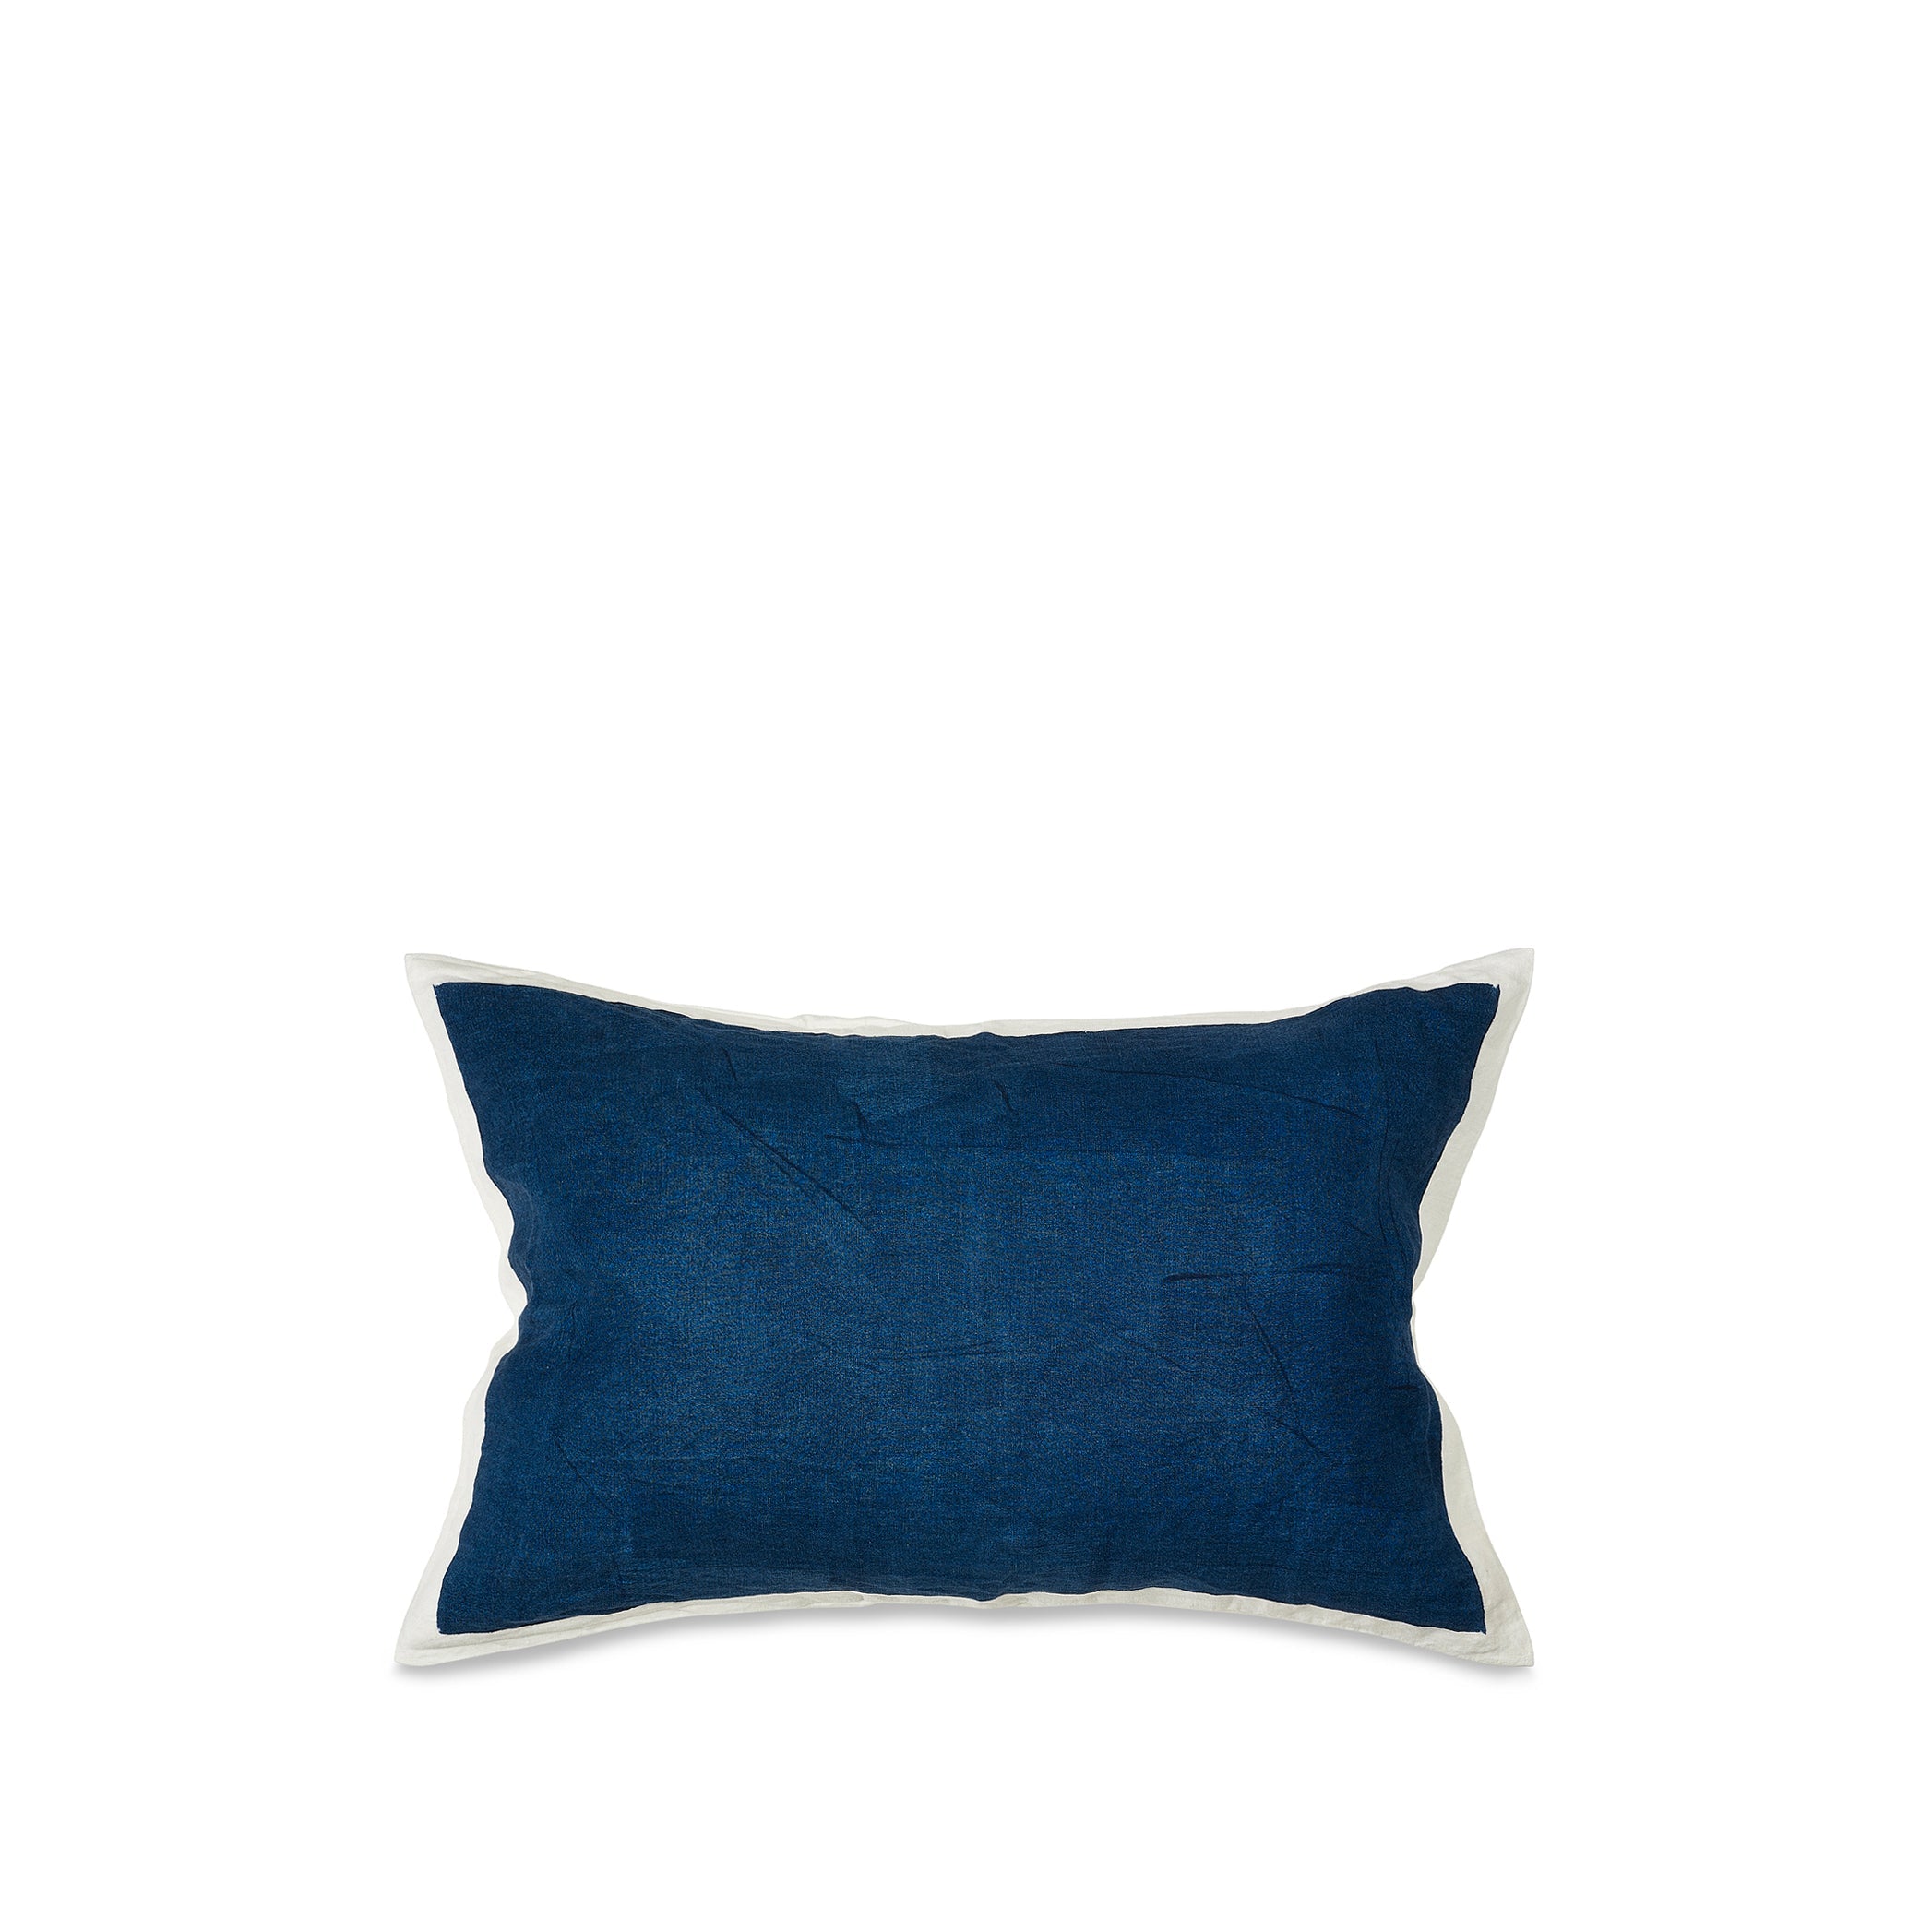 Hand Painted Linen Cushion in Midnight Blue, 60cm x 40cm